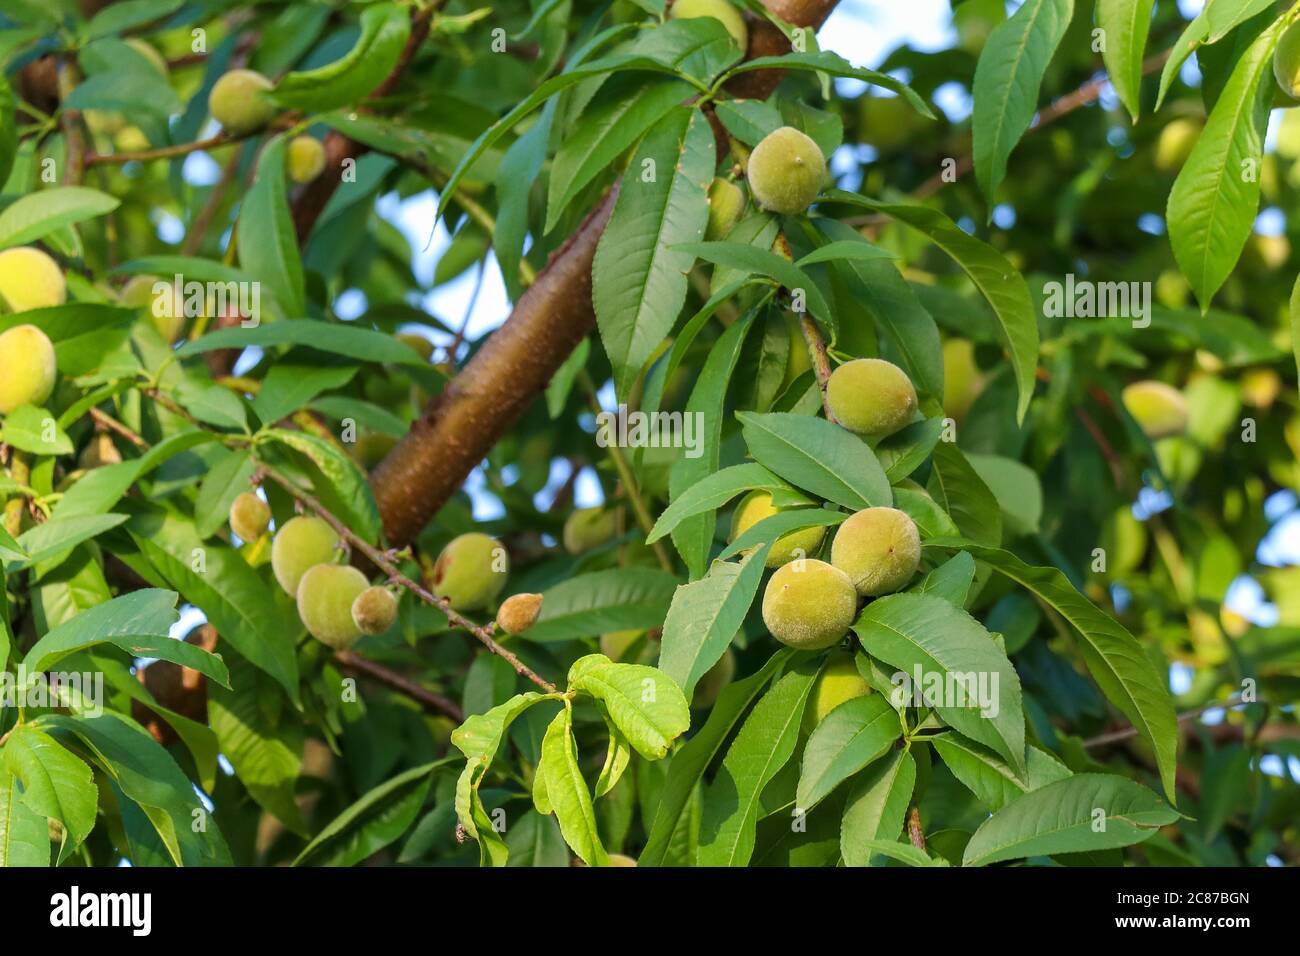 Green peach hanging on the branch with green leaves in a garden Stock Photo